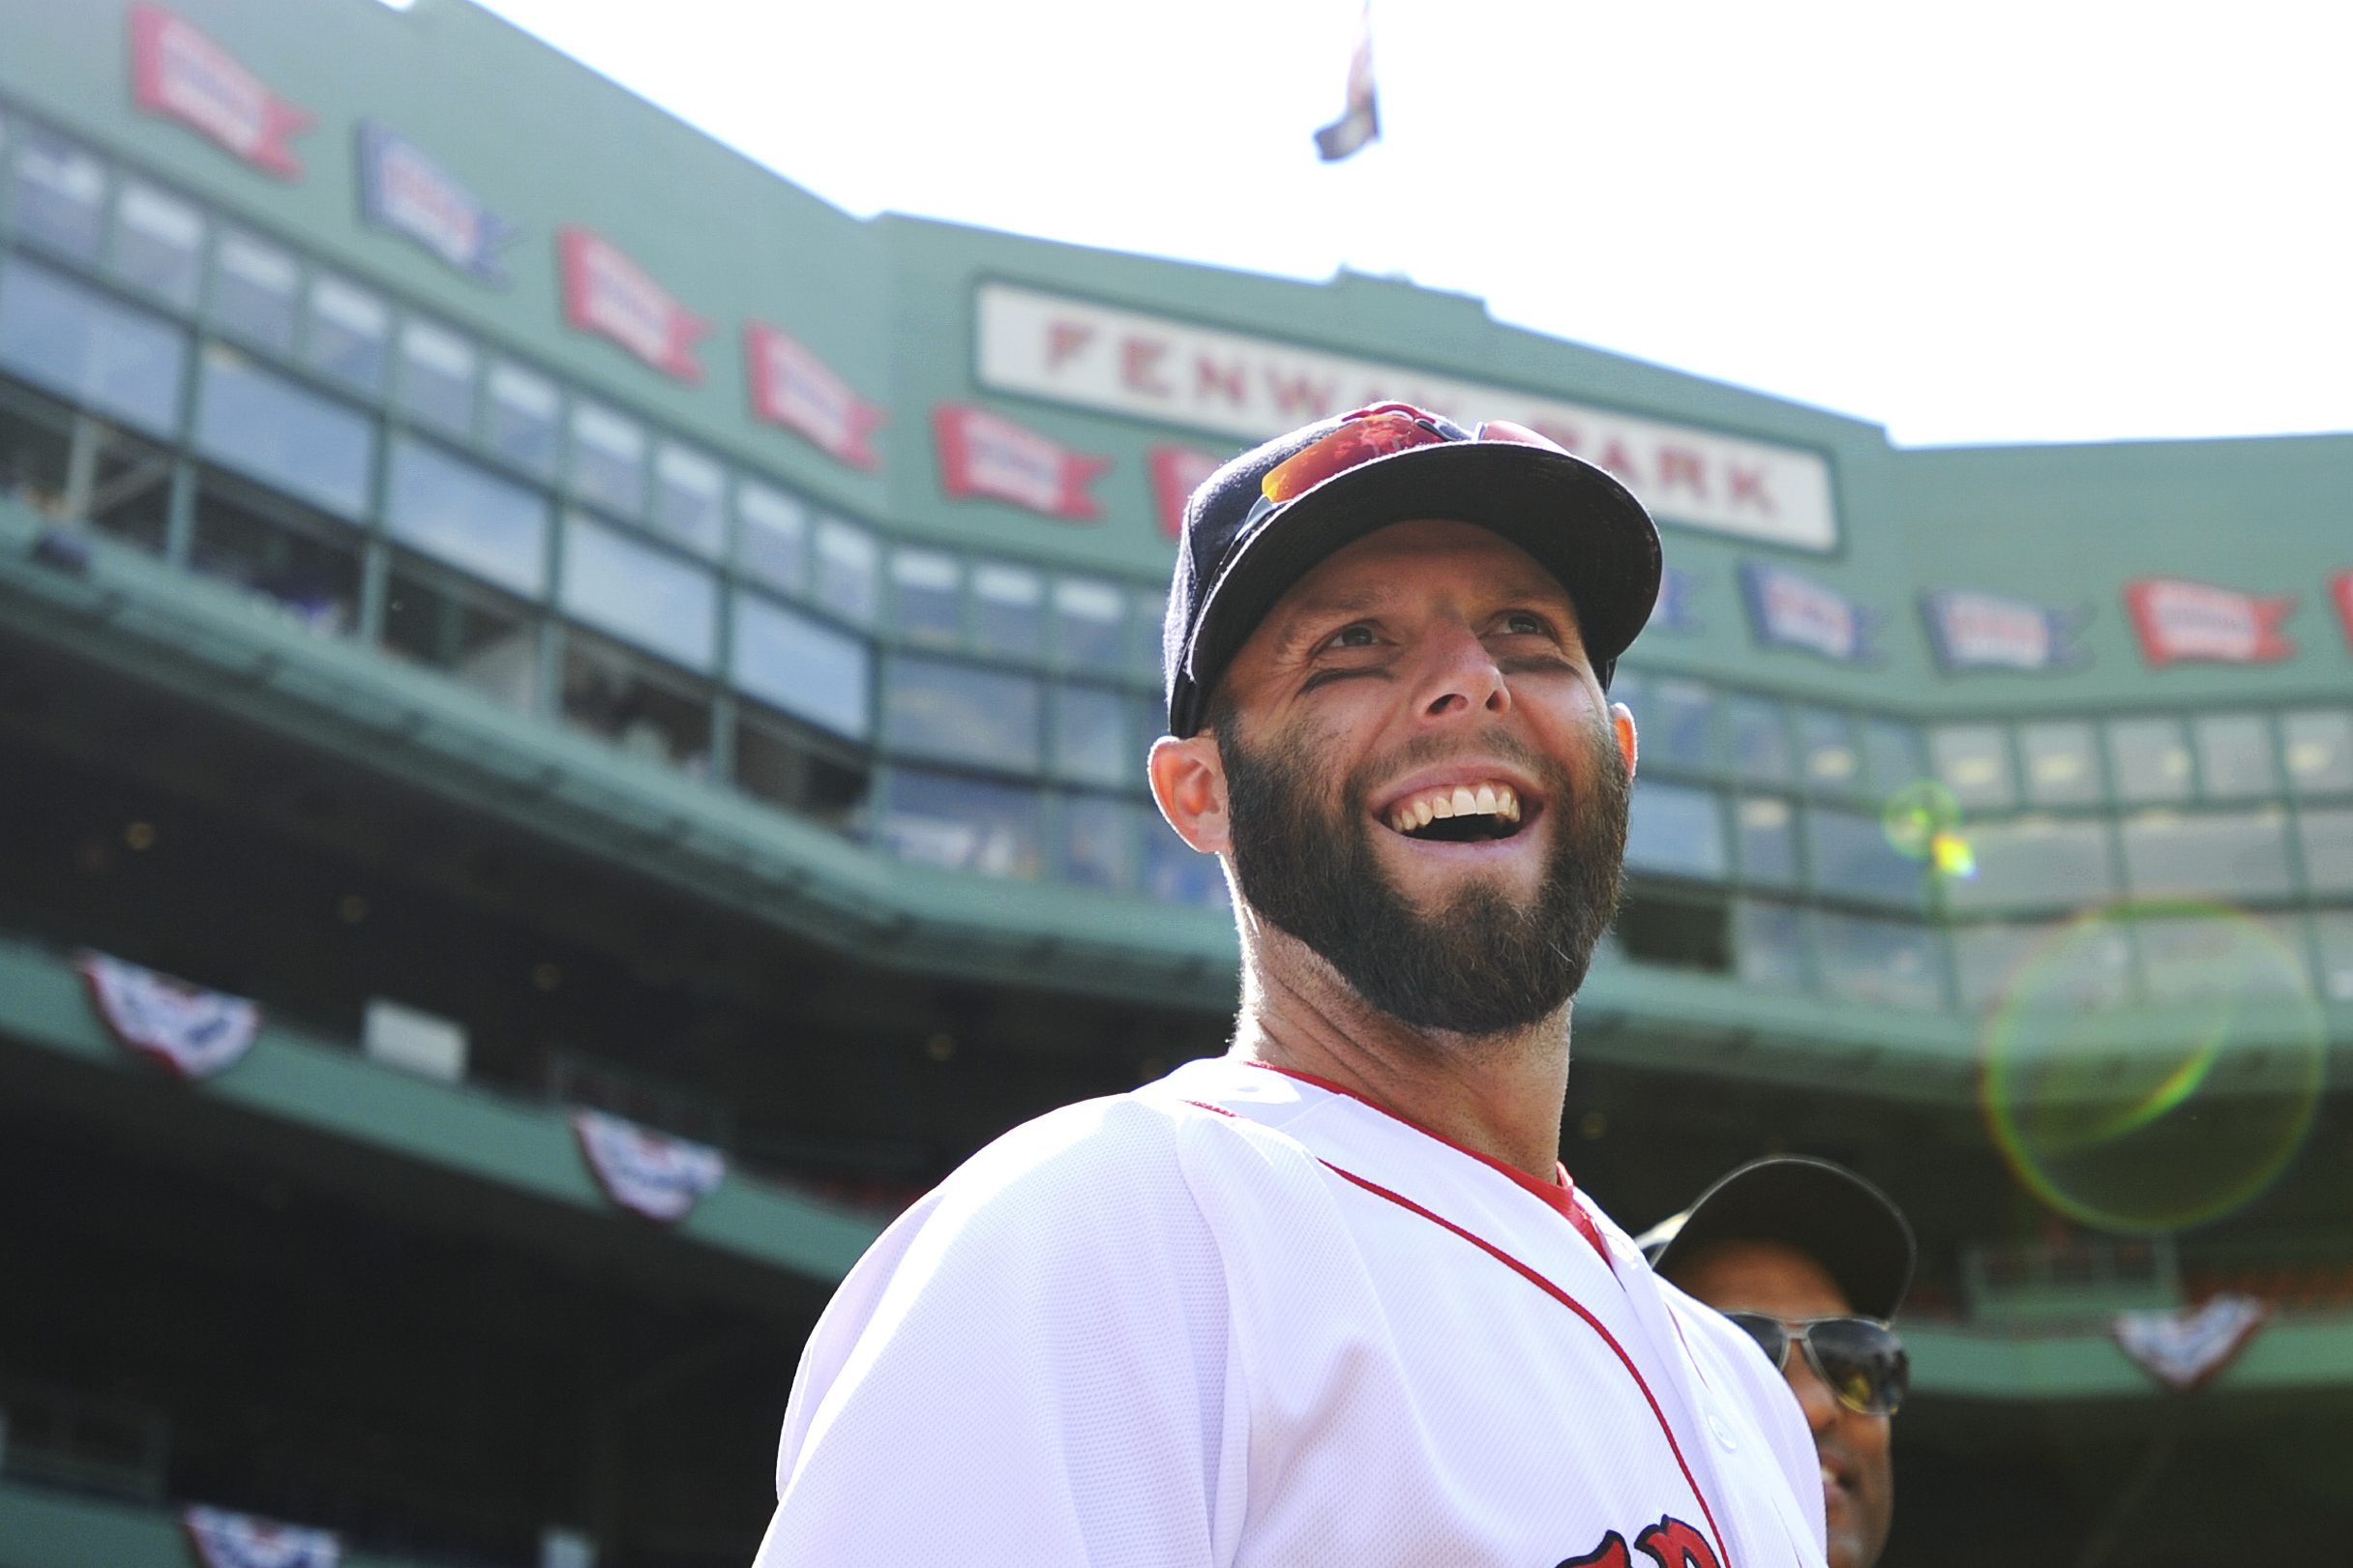 Valley News - Pedroia plays it safe this time